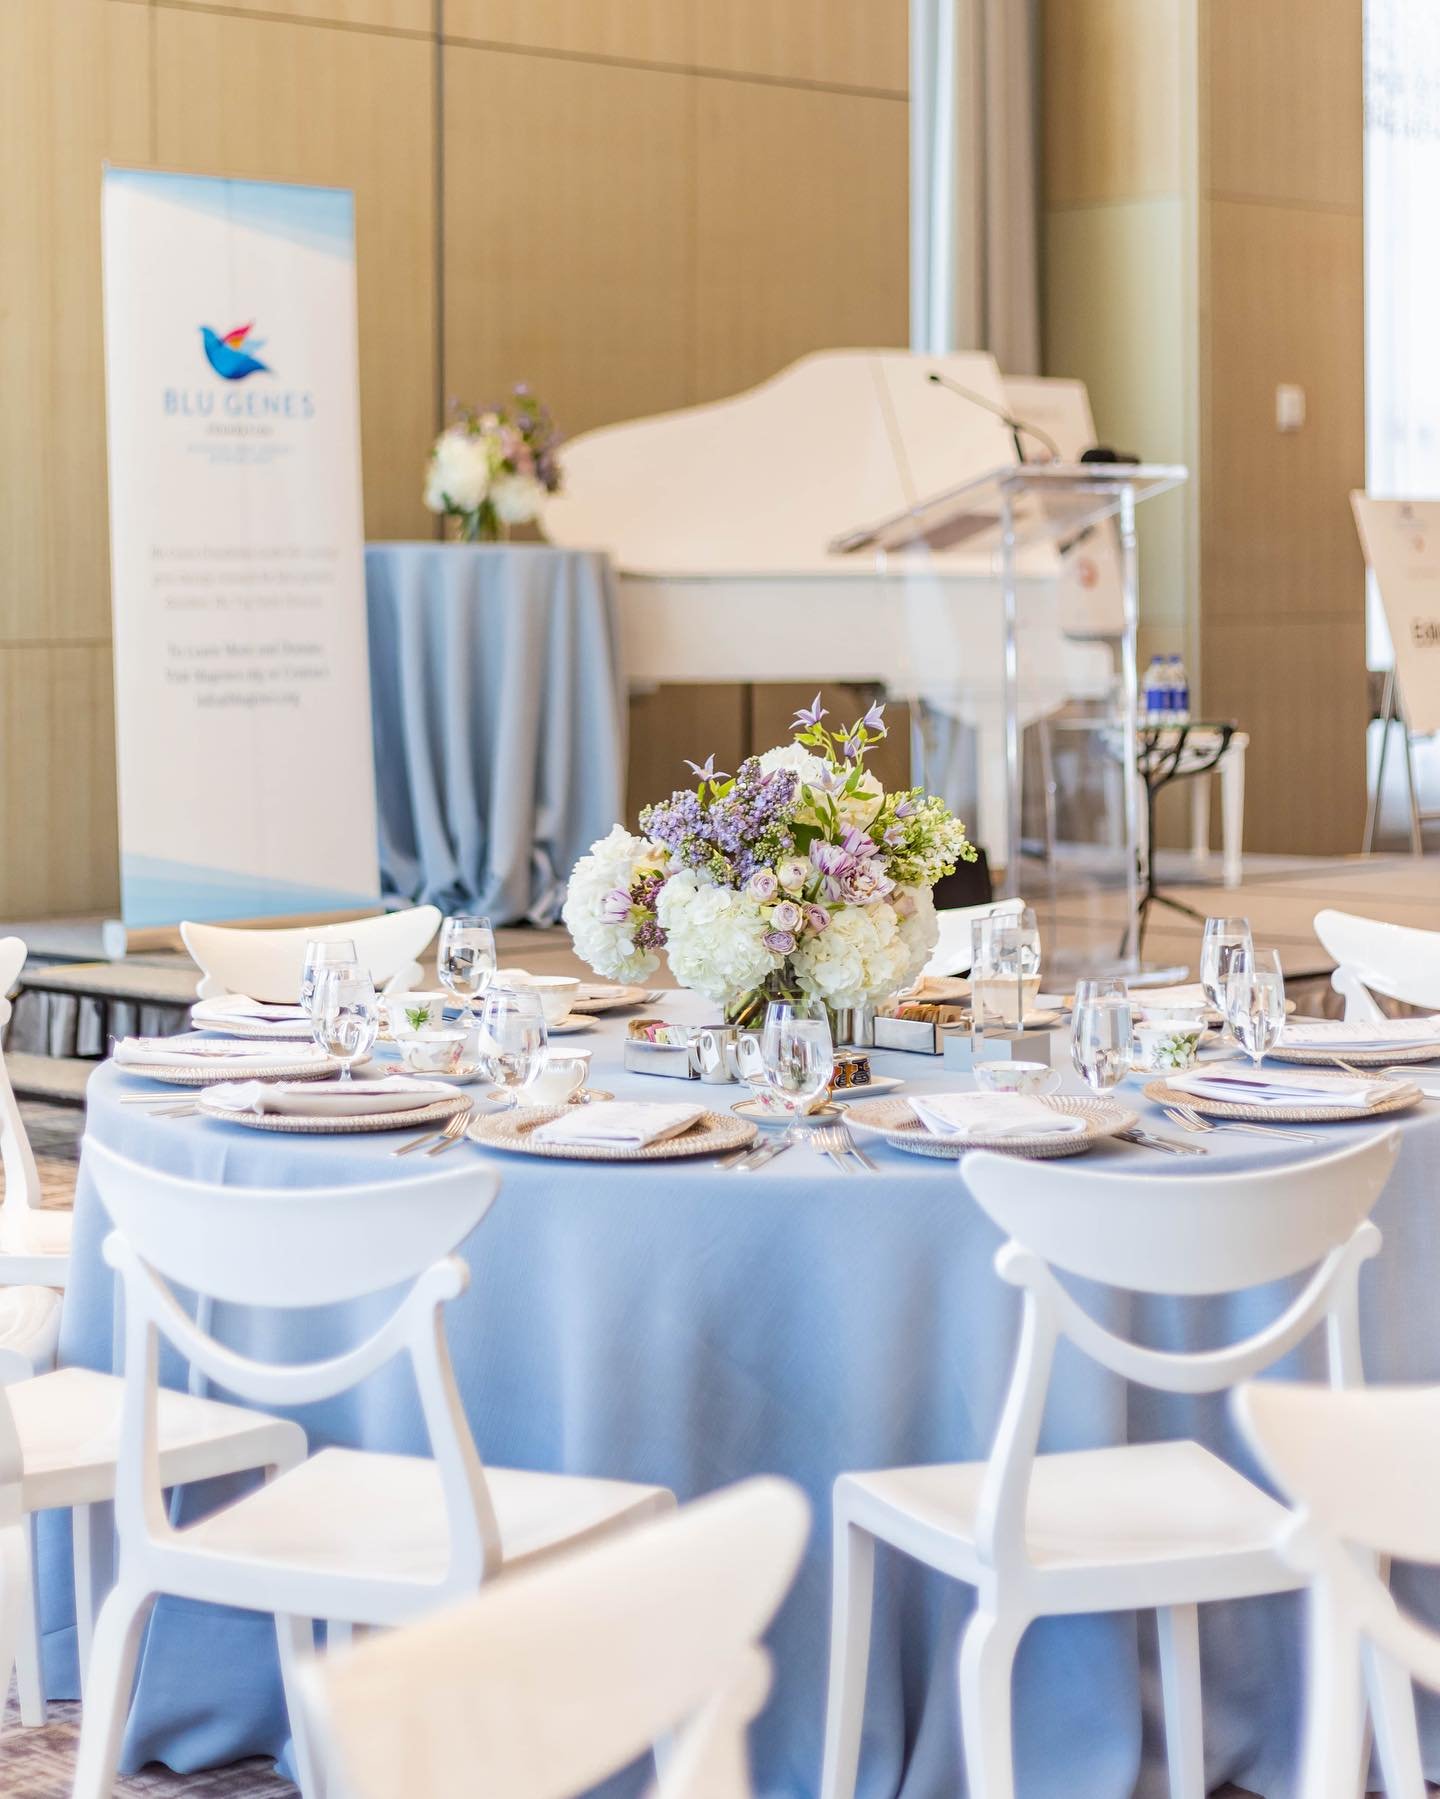 We are so grateful to be able to celebrate and plan another amazing Tea for Blu in support of The Blu Genes Foundation @blugenesfdn 

A special thanks to our incredible event sponsors and vendor friends! ✨

@fstoronto 
@stemzflowers 
@detailzfurnitur